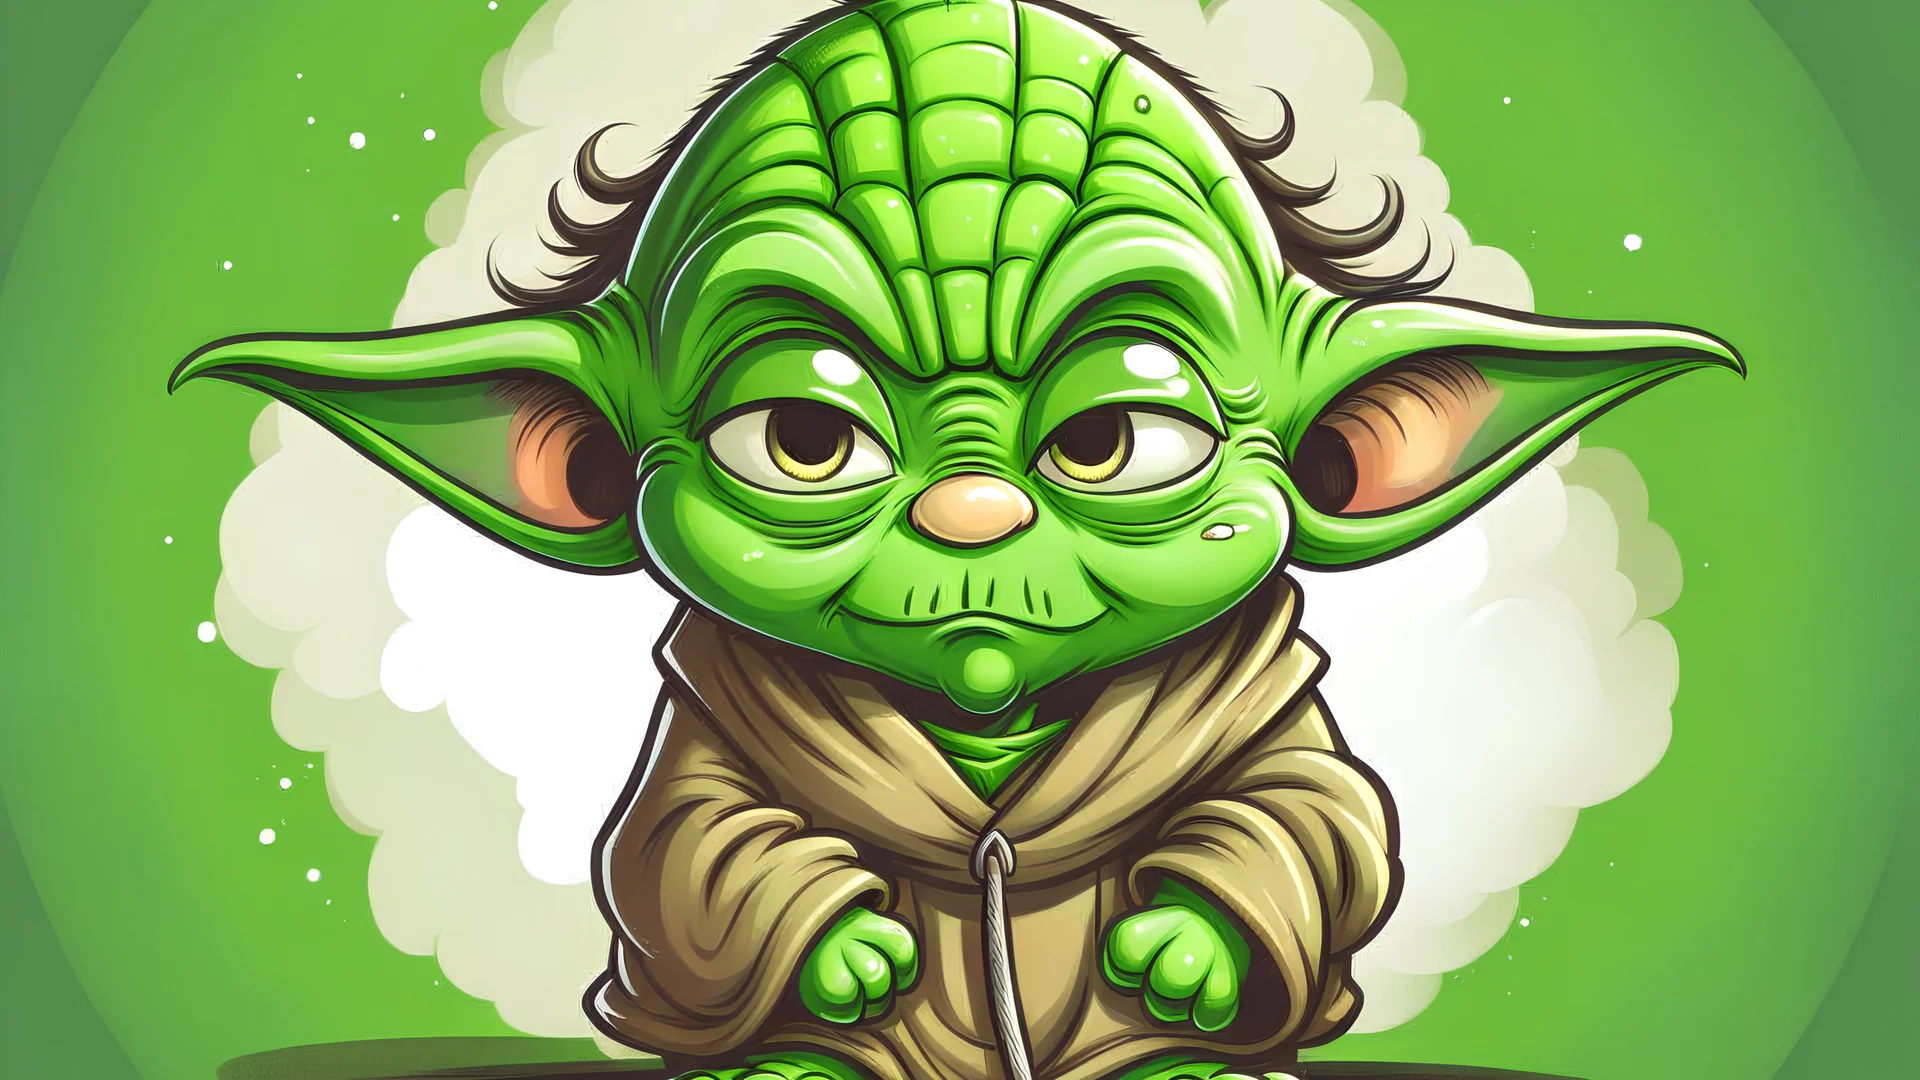 a cute, Yoda, serious and full of wisdom, with smiling eyes, caricature image